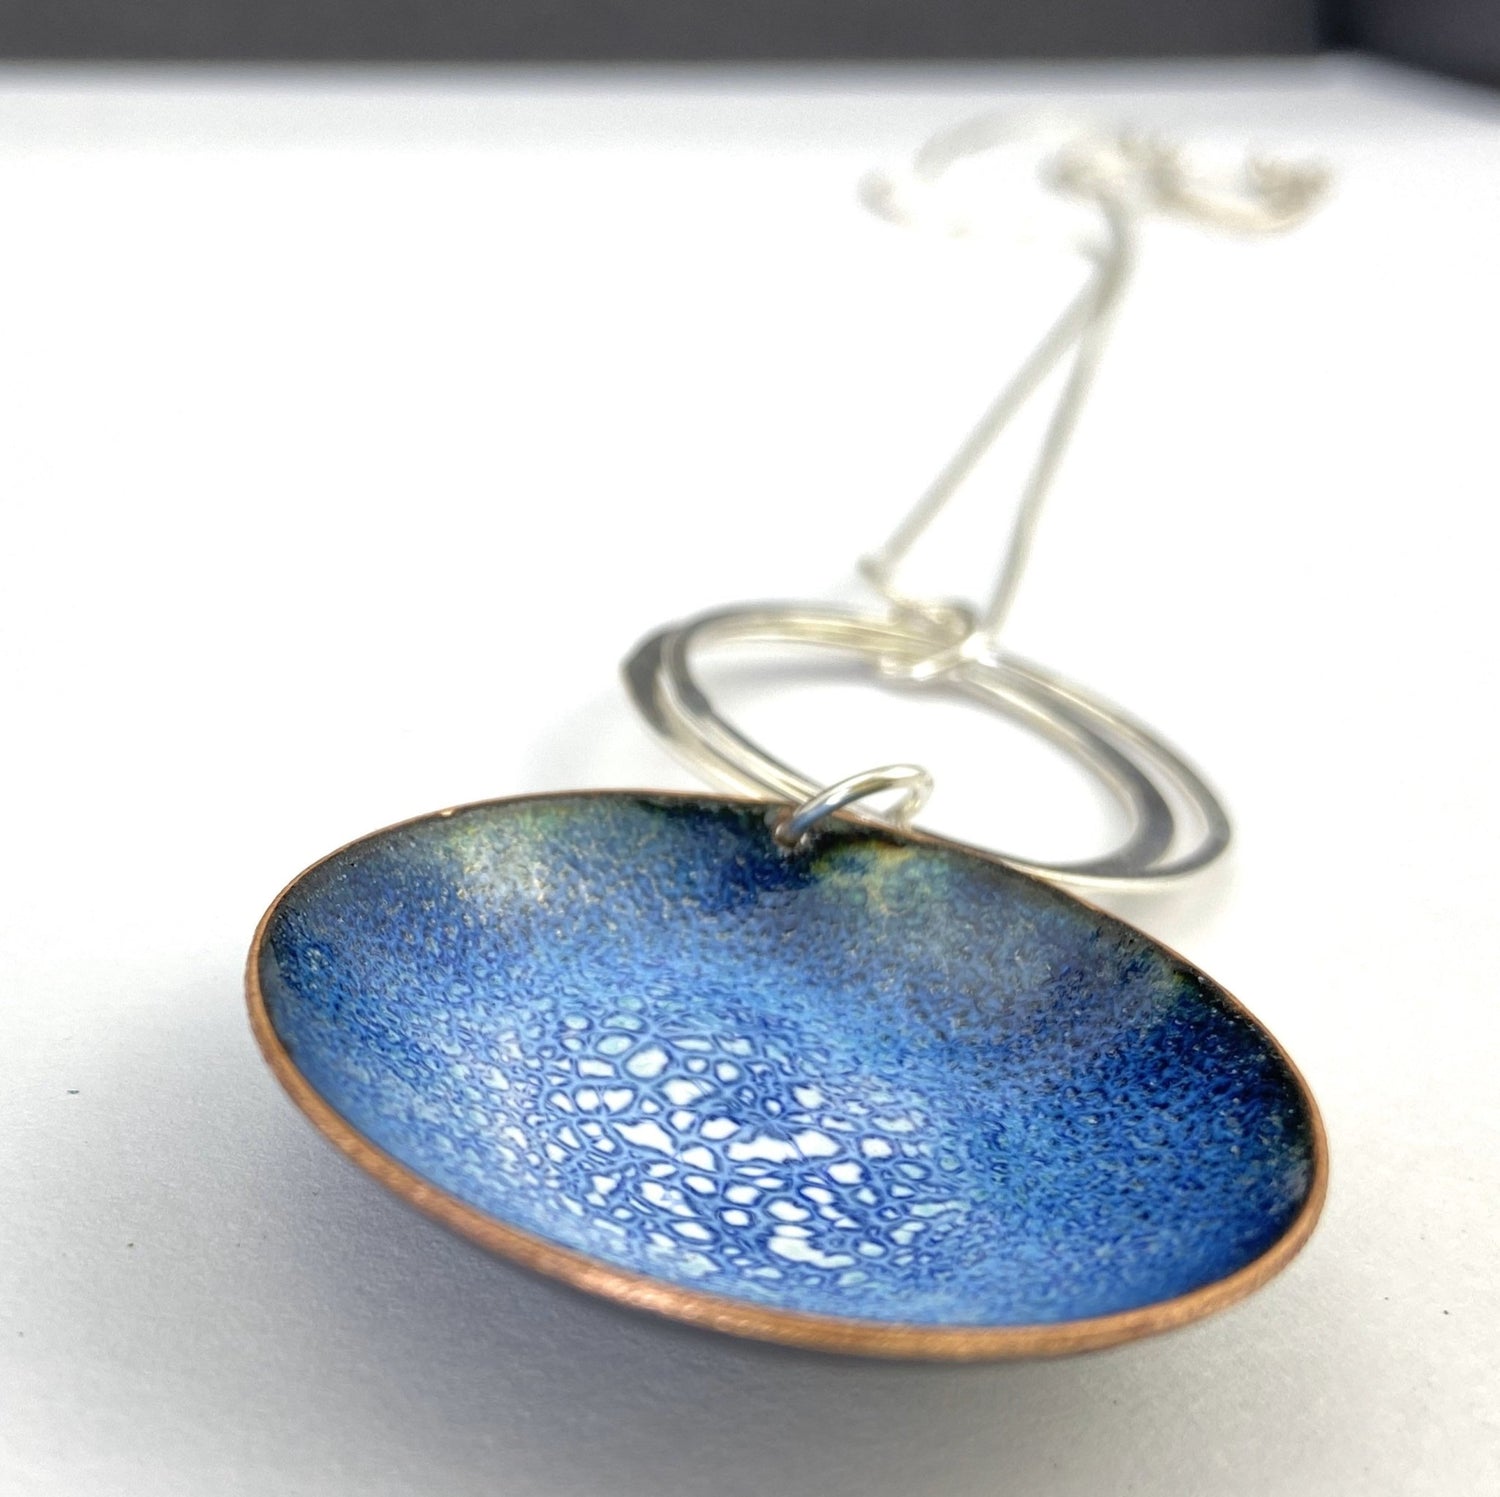 Statement Enamel Pendant - Little copper 'bowls' filled with enamel on sterling silver hoop and chain - Katie Johnston Jewellery